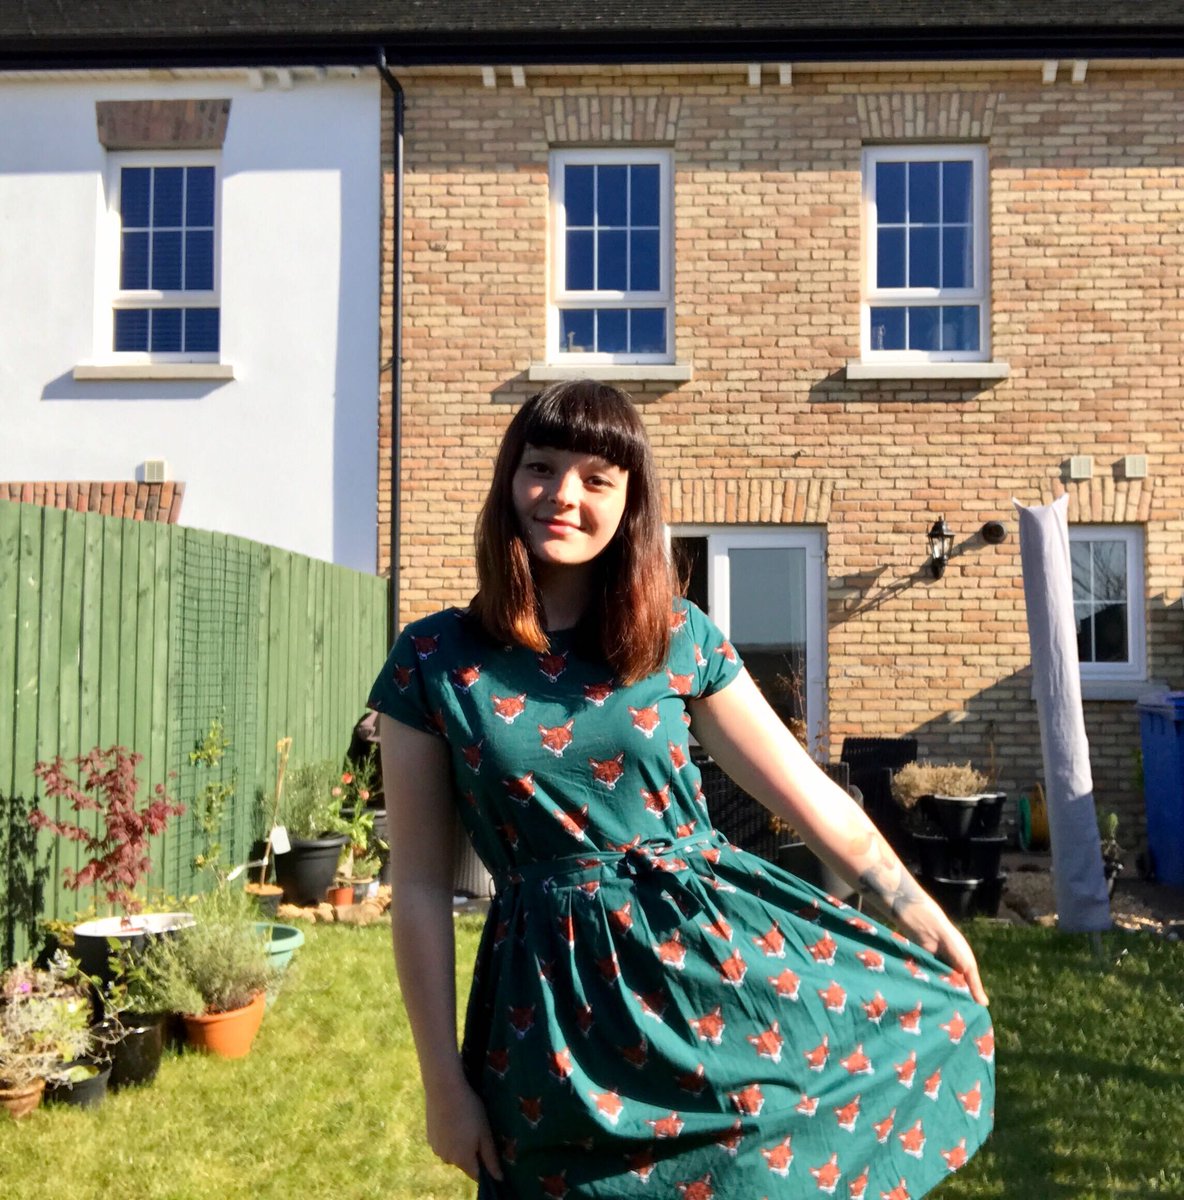 Participant  @HannahLizSharp is currently in luck "I love patterned, floaty dresses when we get the weather for them!" 